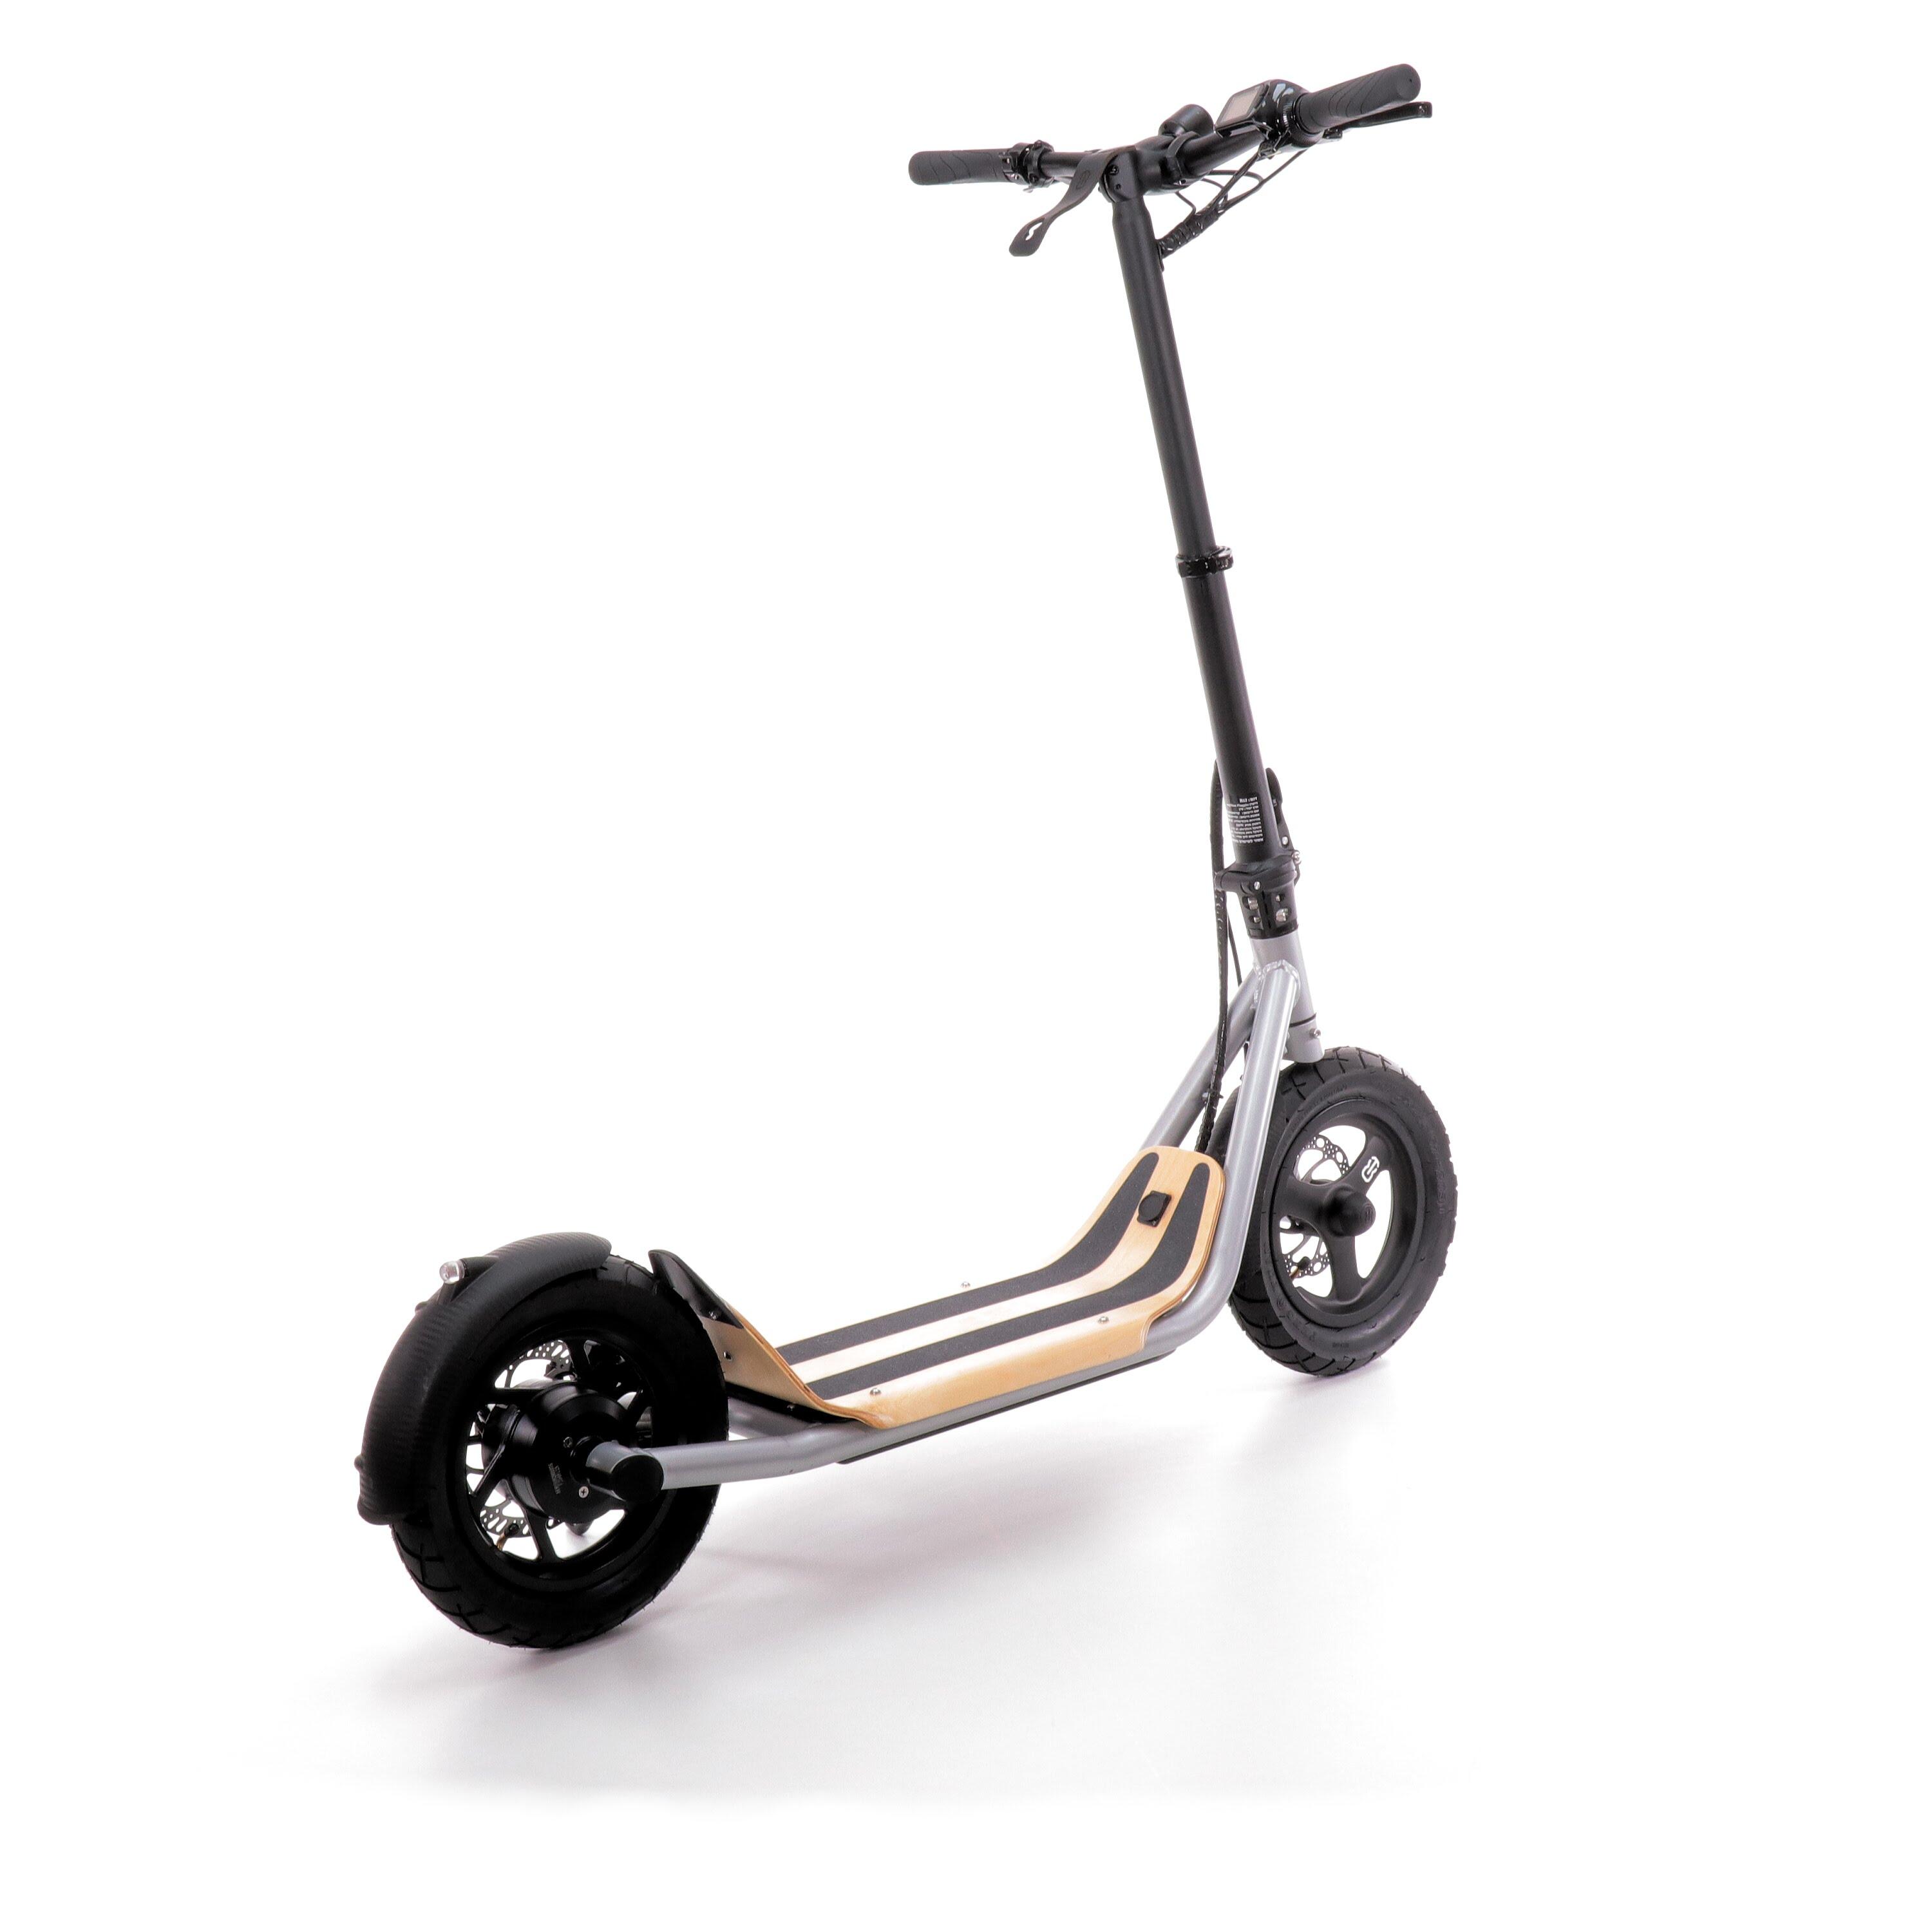 8Tev Adult Electric Scooter, B12 Proxi, Silver 3/5